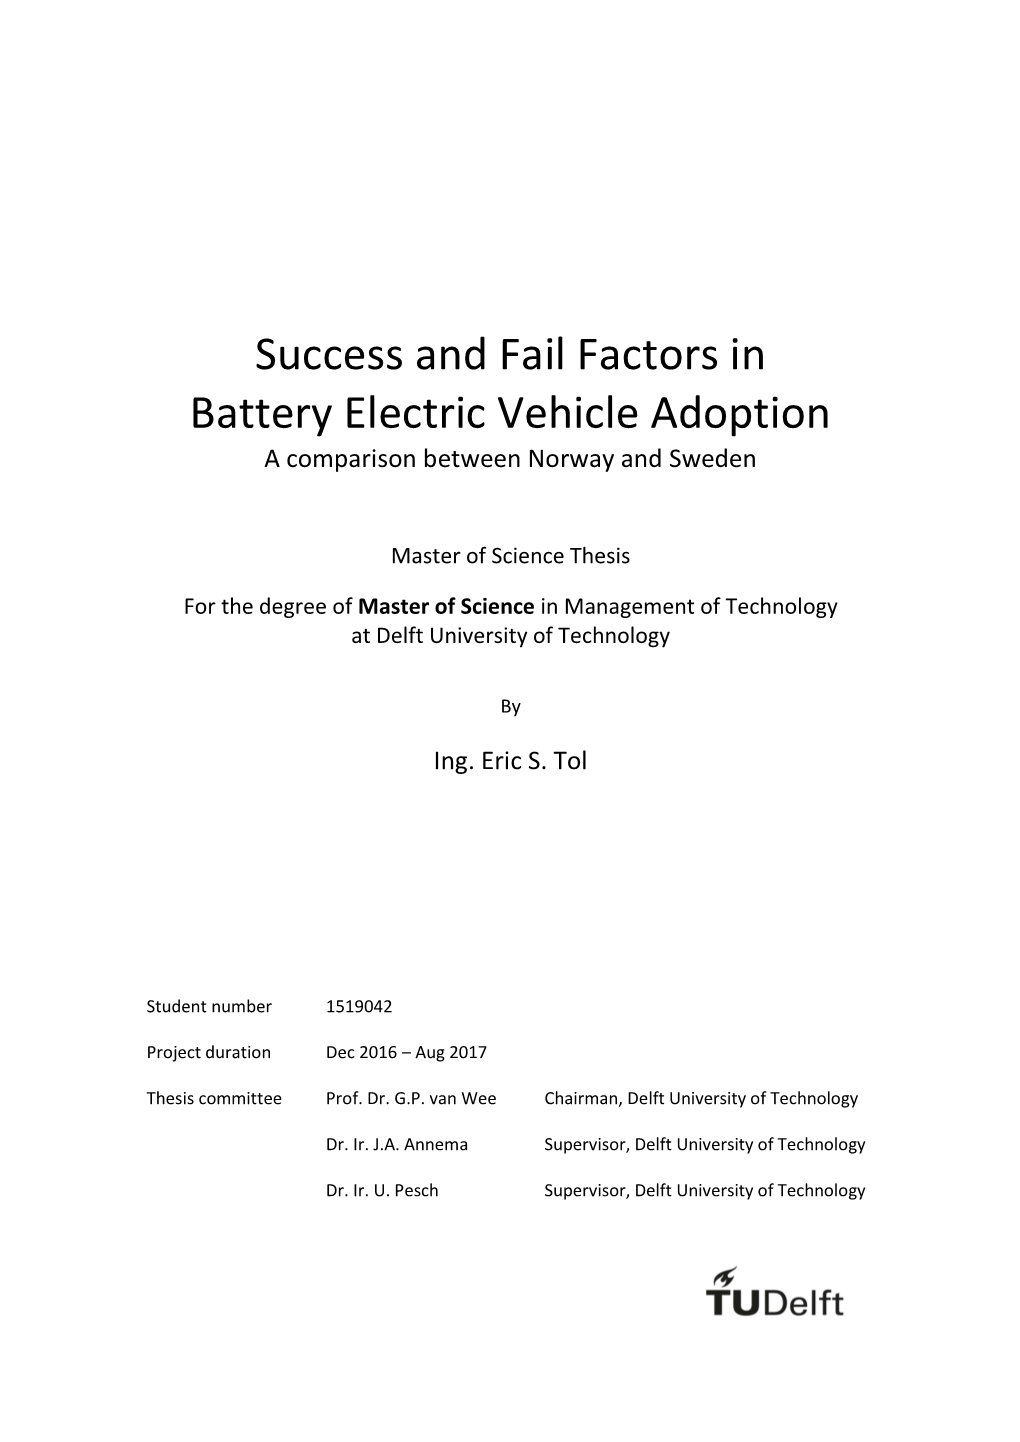 Success and Fail Factors in Battery Electric Vehicle Adoption a Comparison Between Norway and Sweden